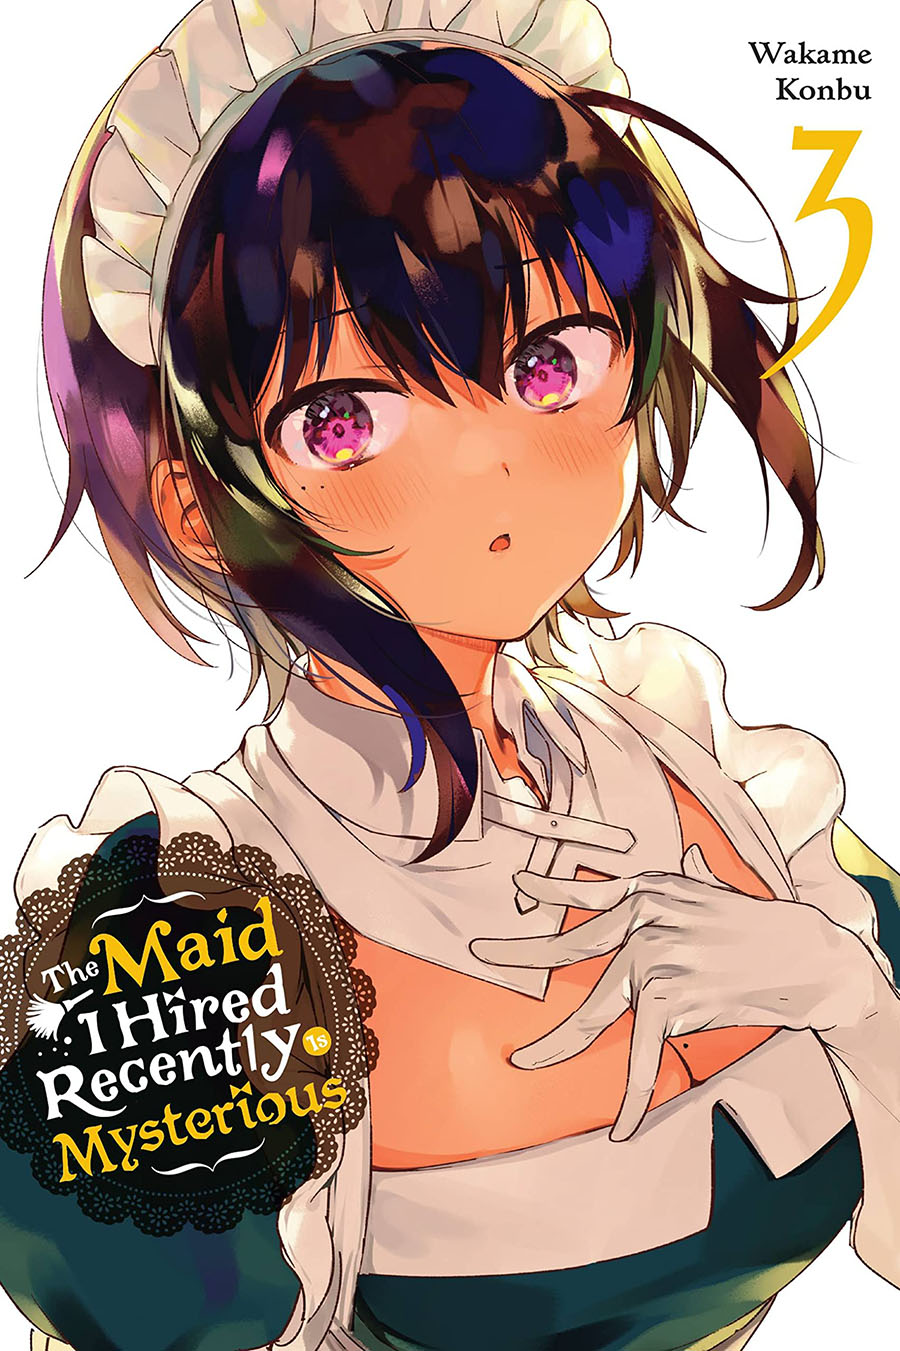 Maid I Hired Recently Is Mysterious Vol 3 GN